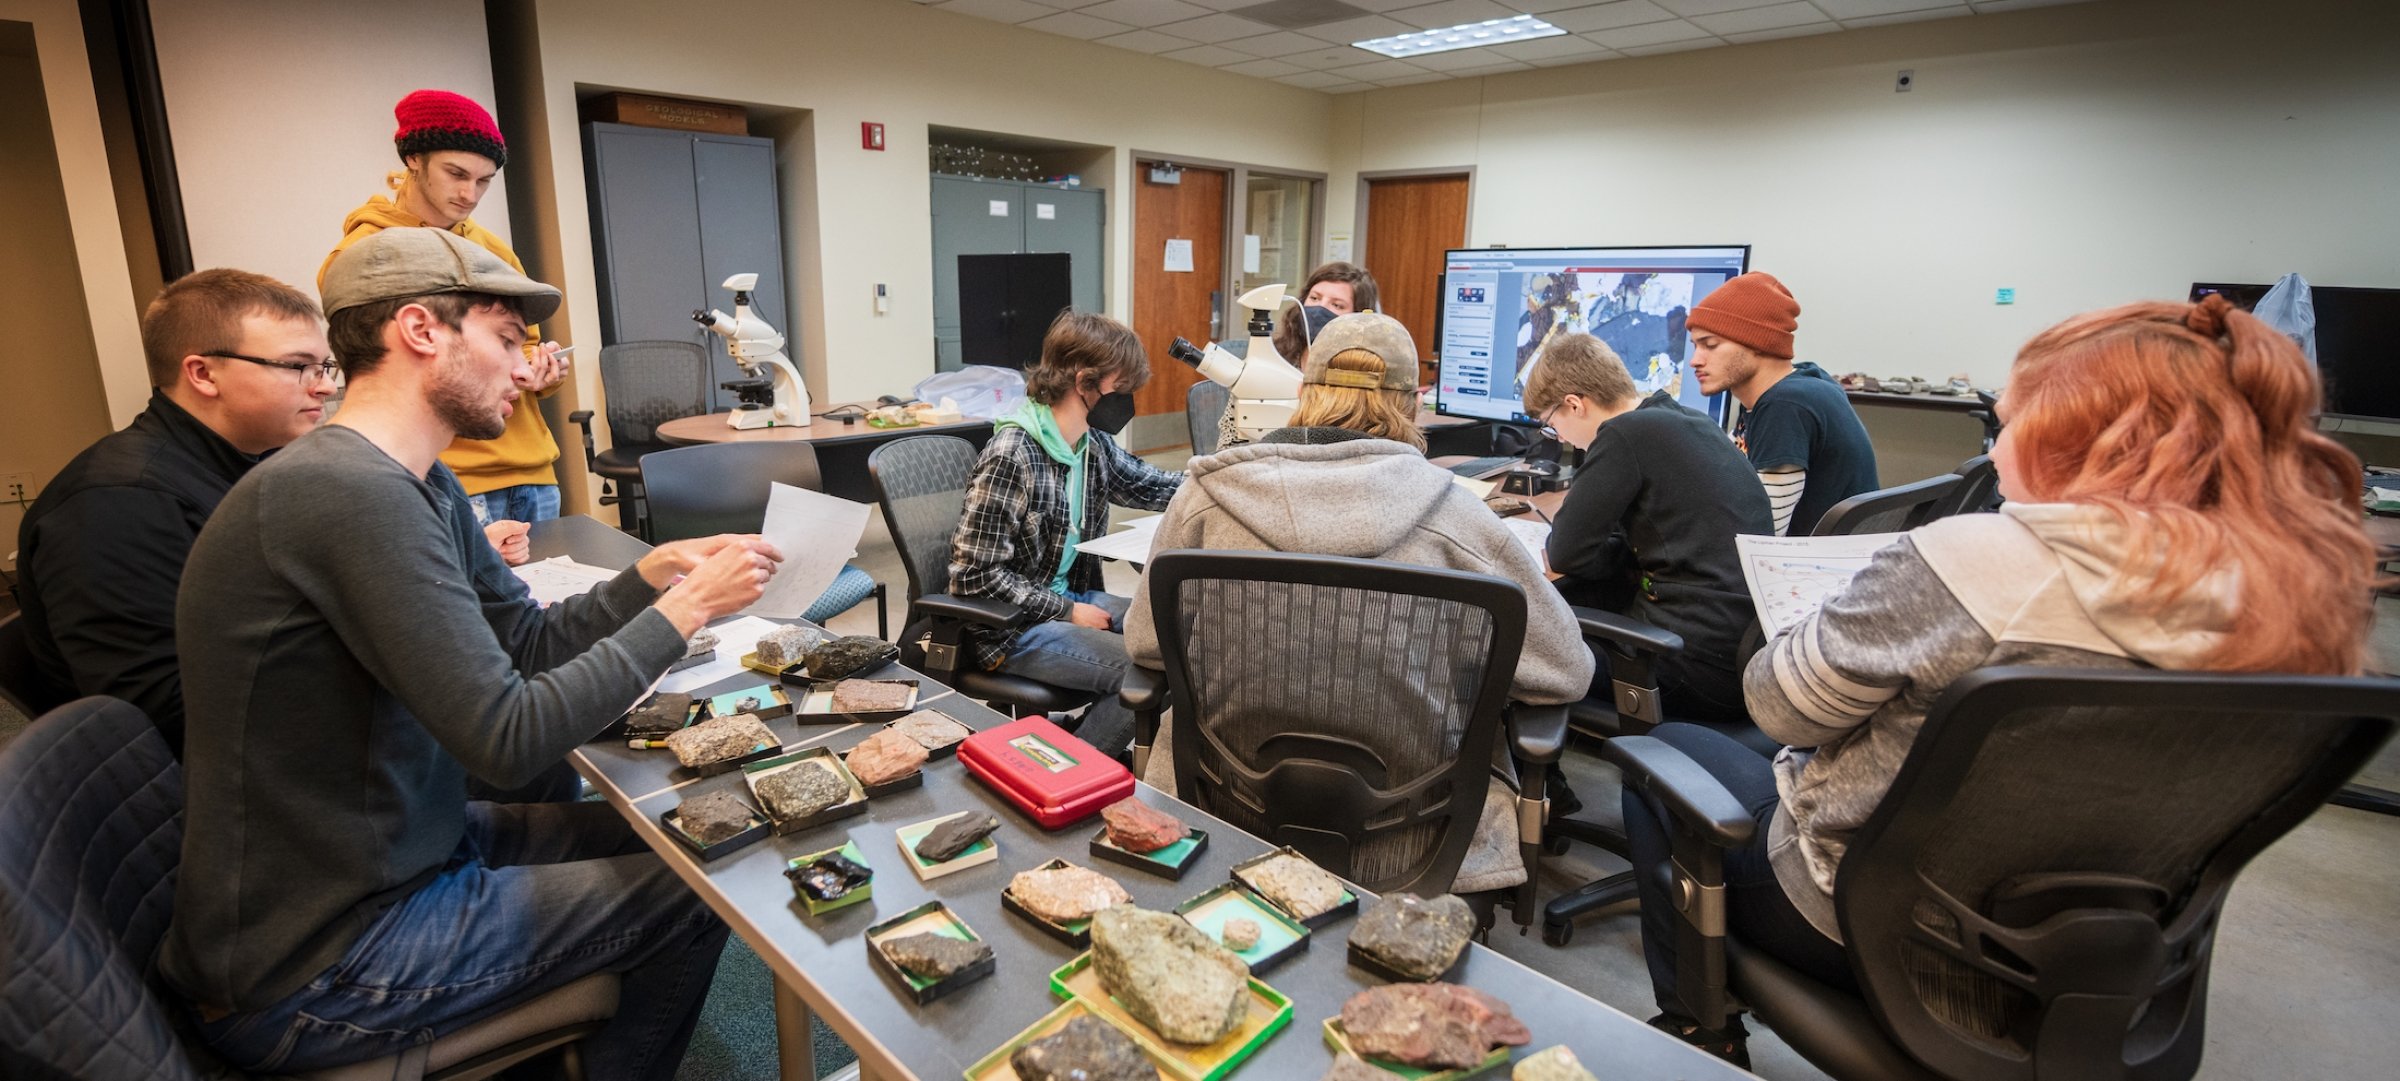 Students in geological engineering work together on geo specimens.